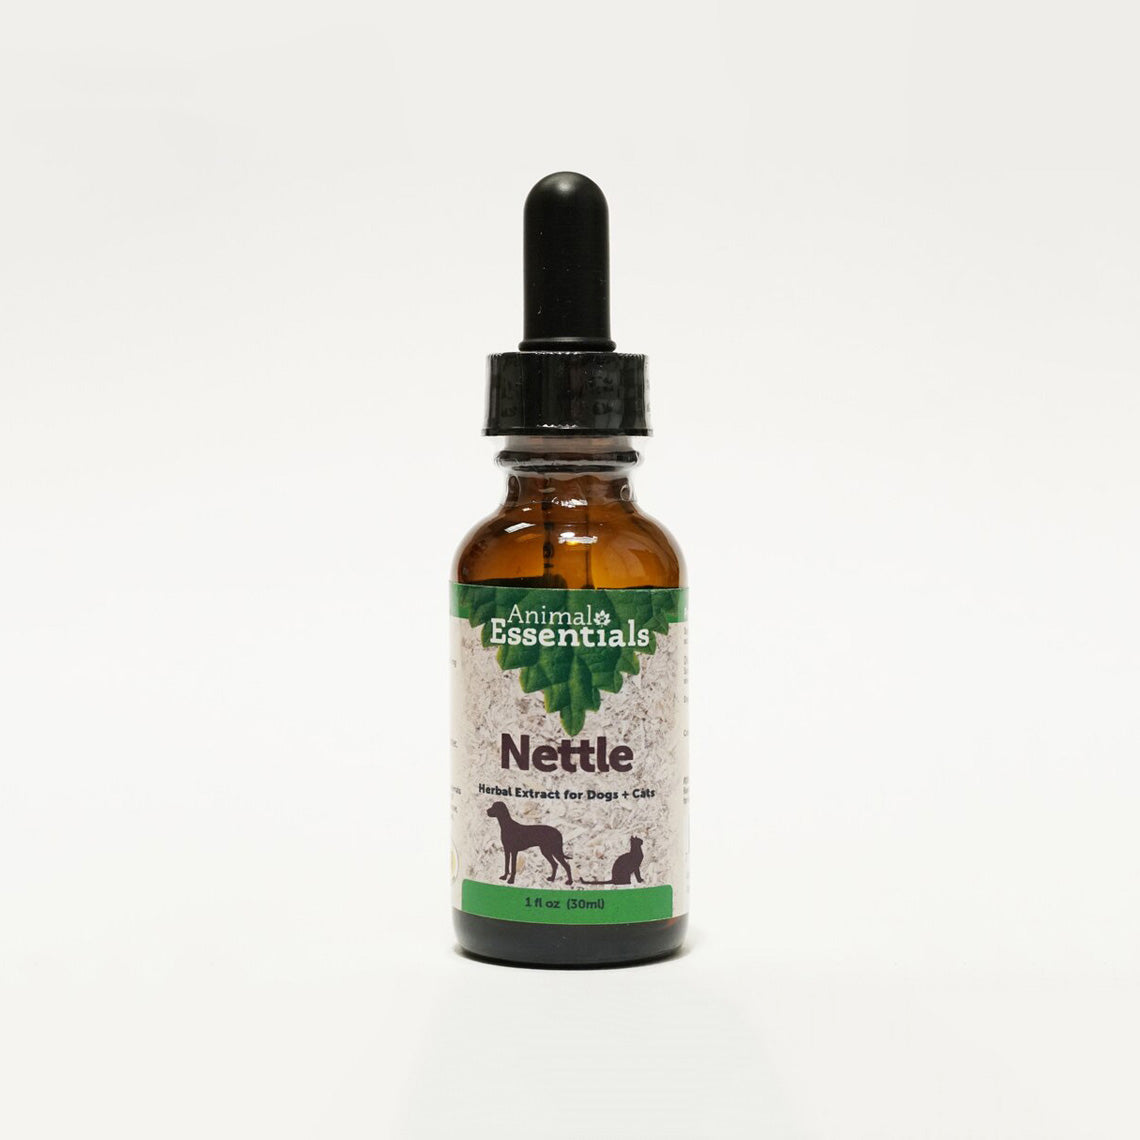 animal-essentials-nettle-extract-for-dogs-cats-only-natural-pet